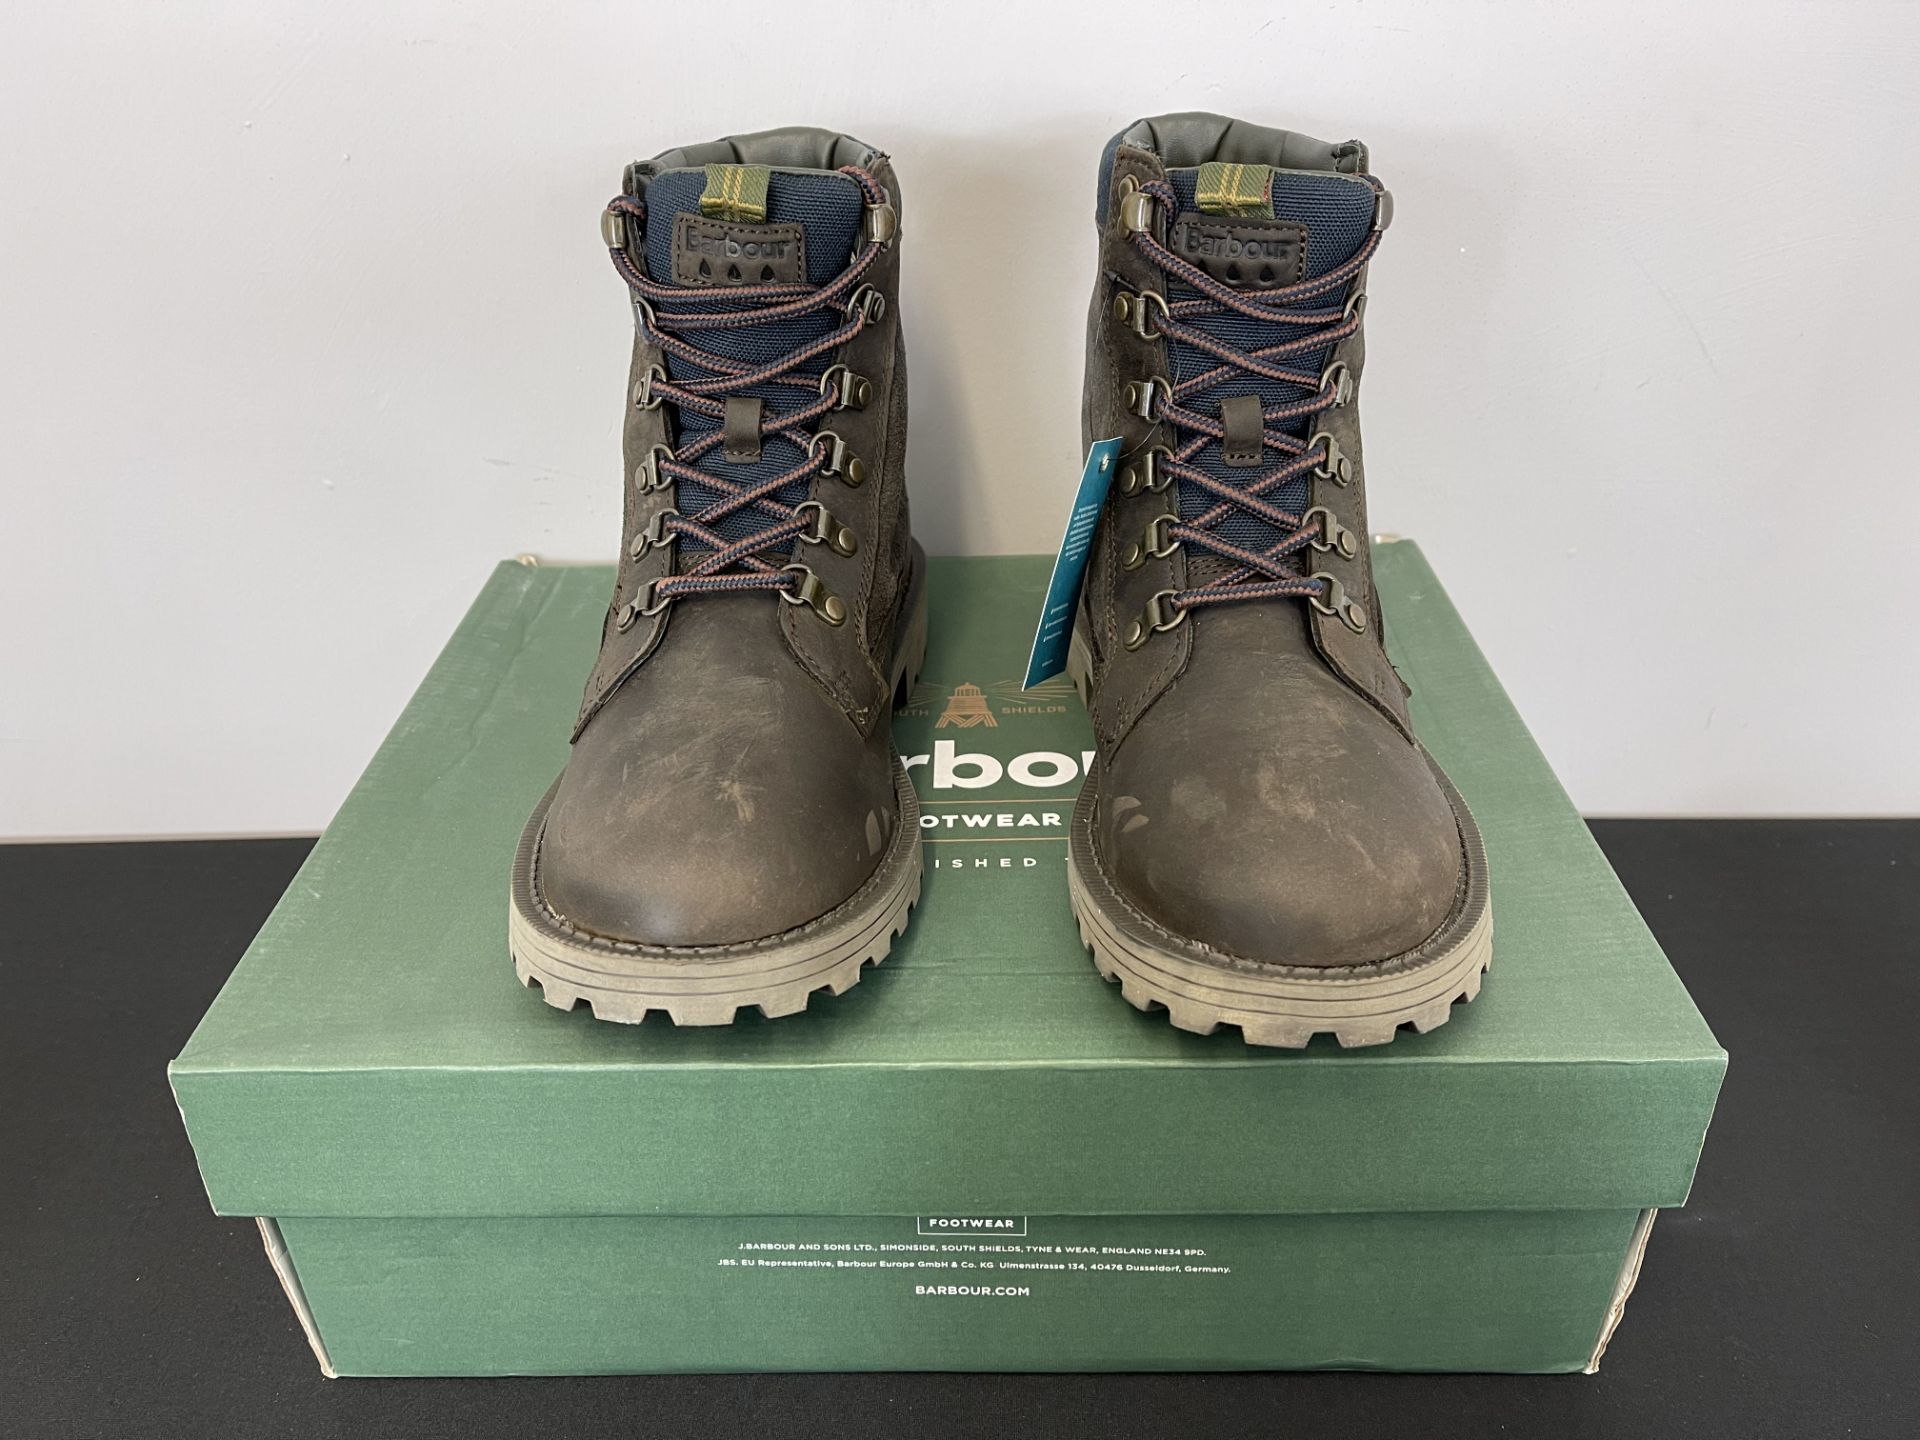 New Size 7 Barbour Oak Chiltern Boots - RRP £169. - Image 3 of 3